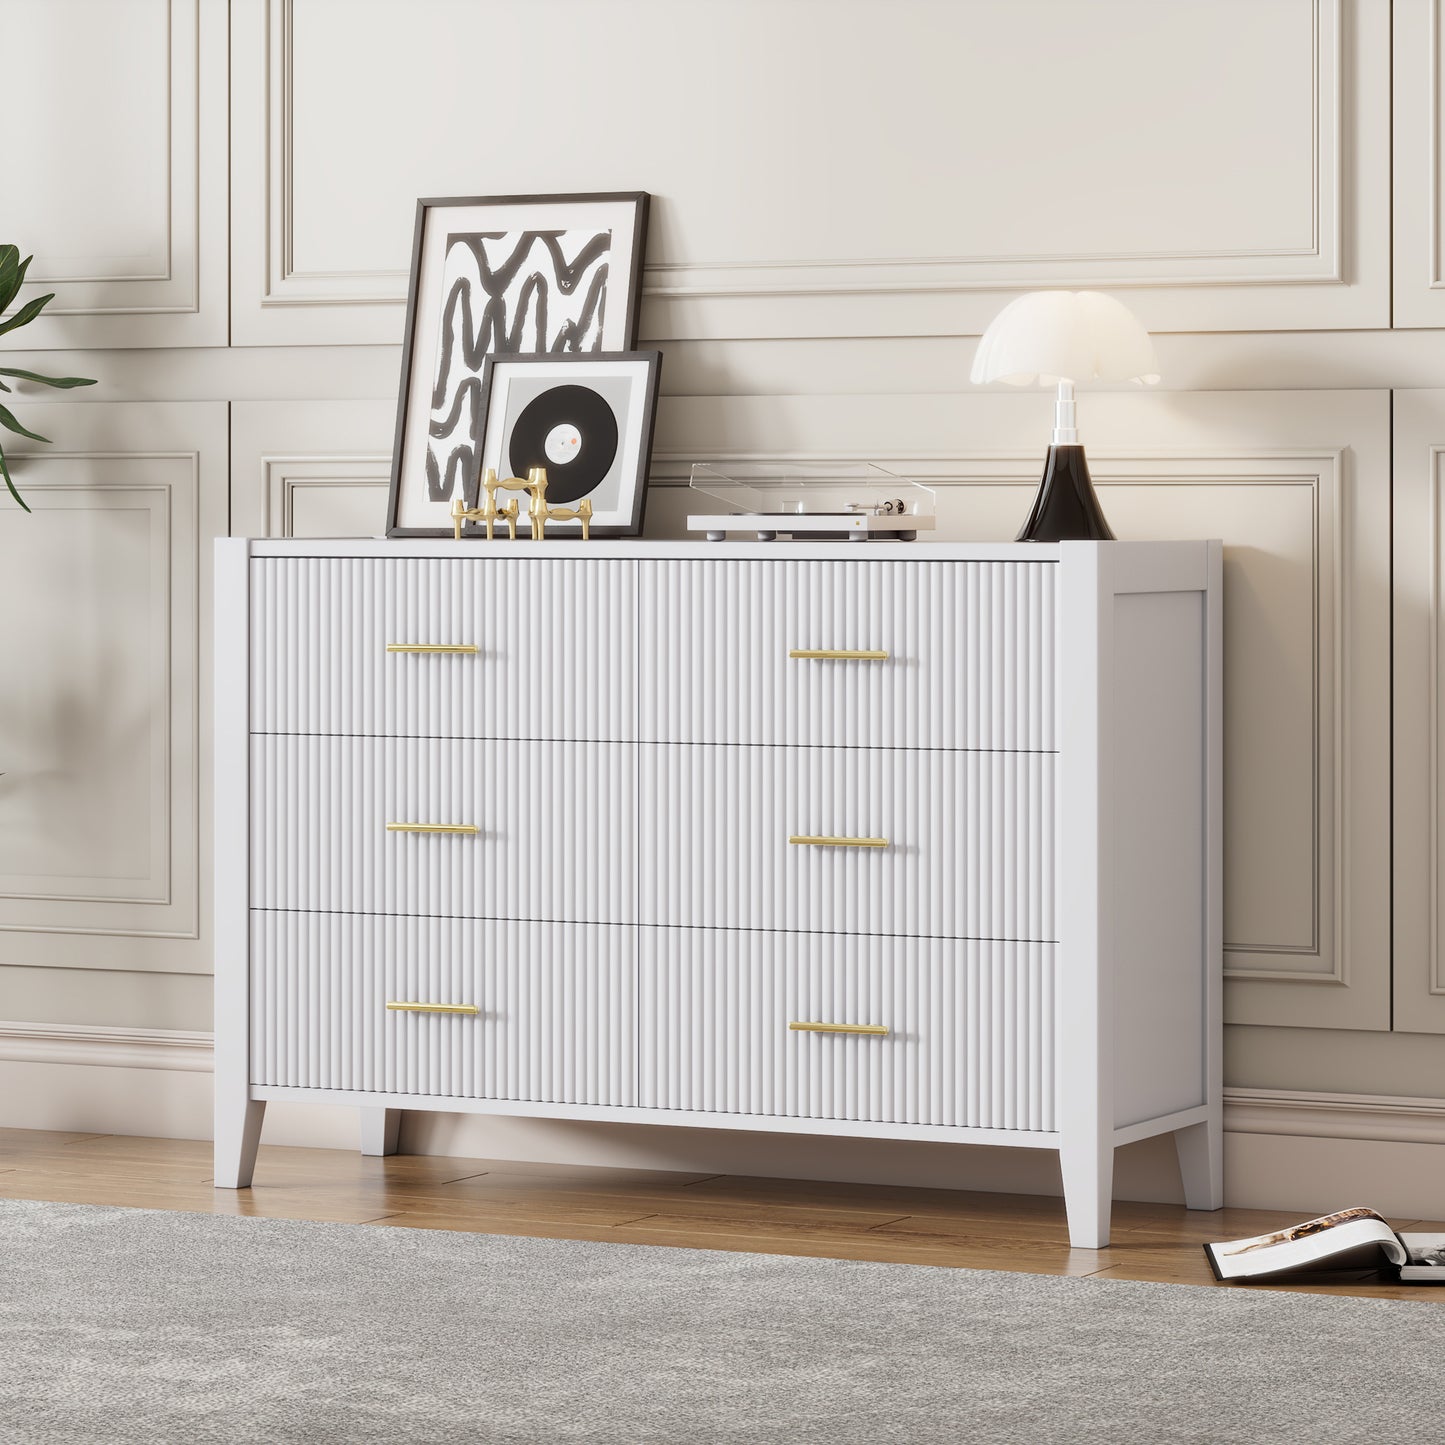 6 drawer dresser with metal handle for bedroom, white